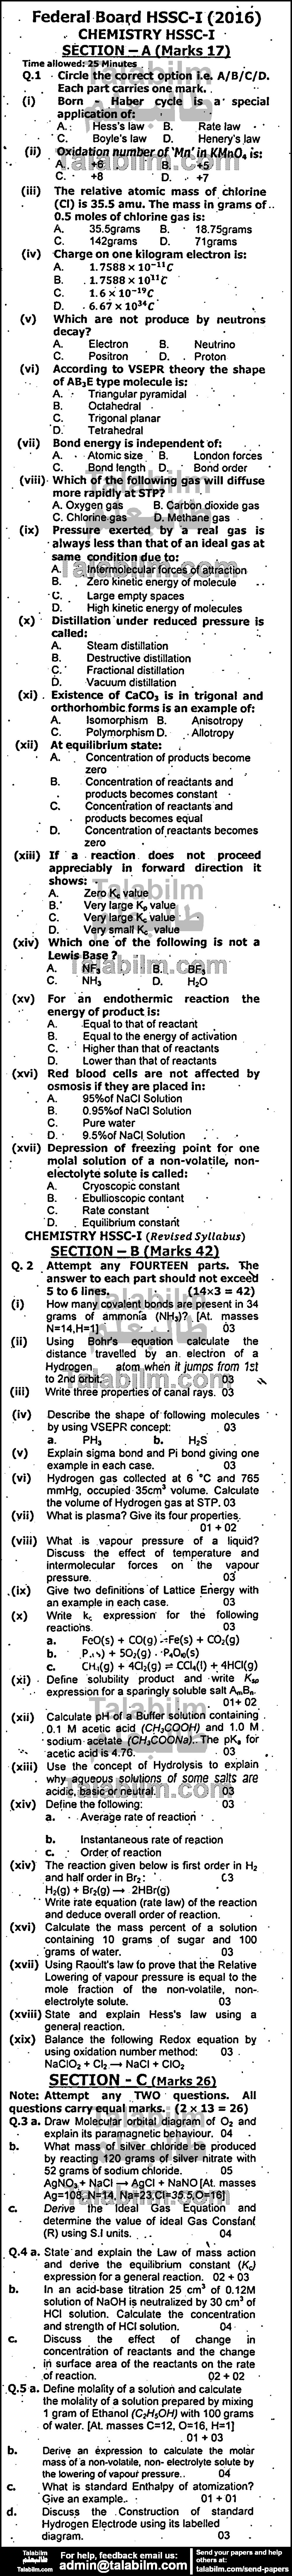 Chemistry 0 past paper for Group-I 2016